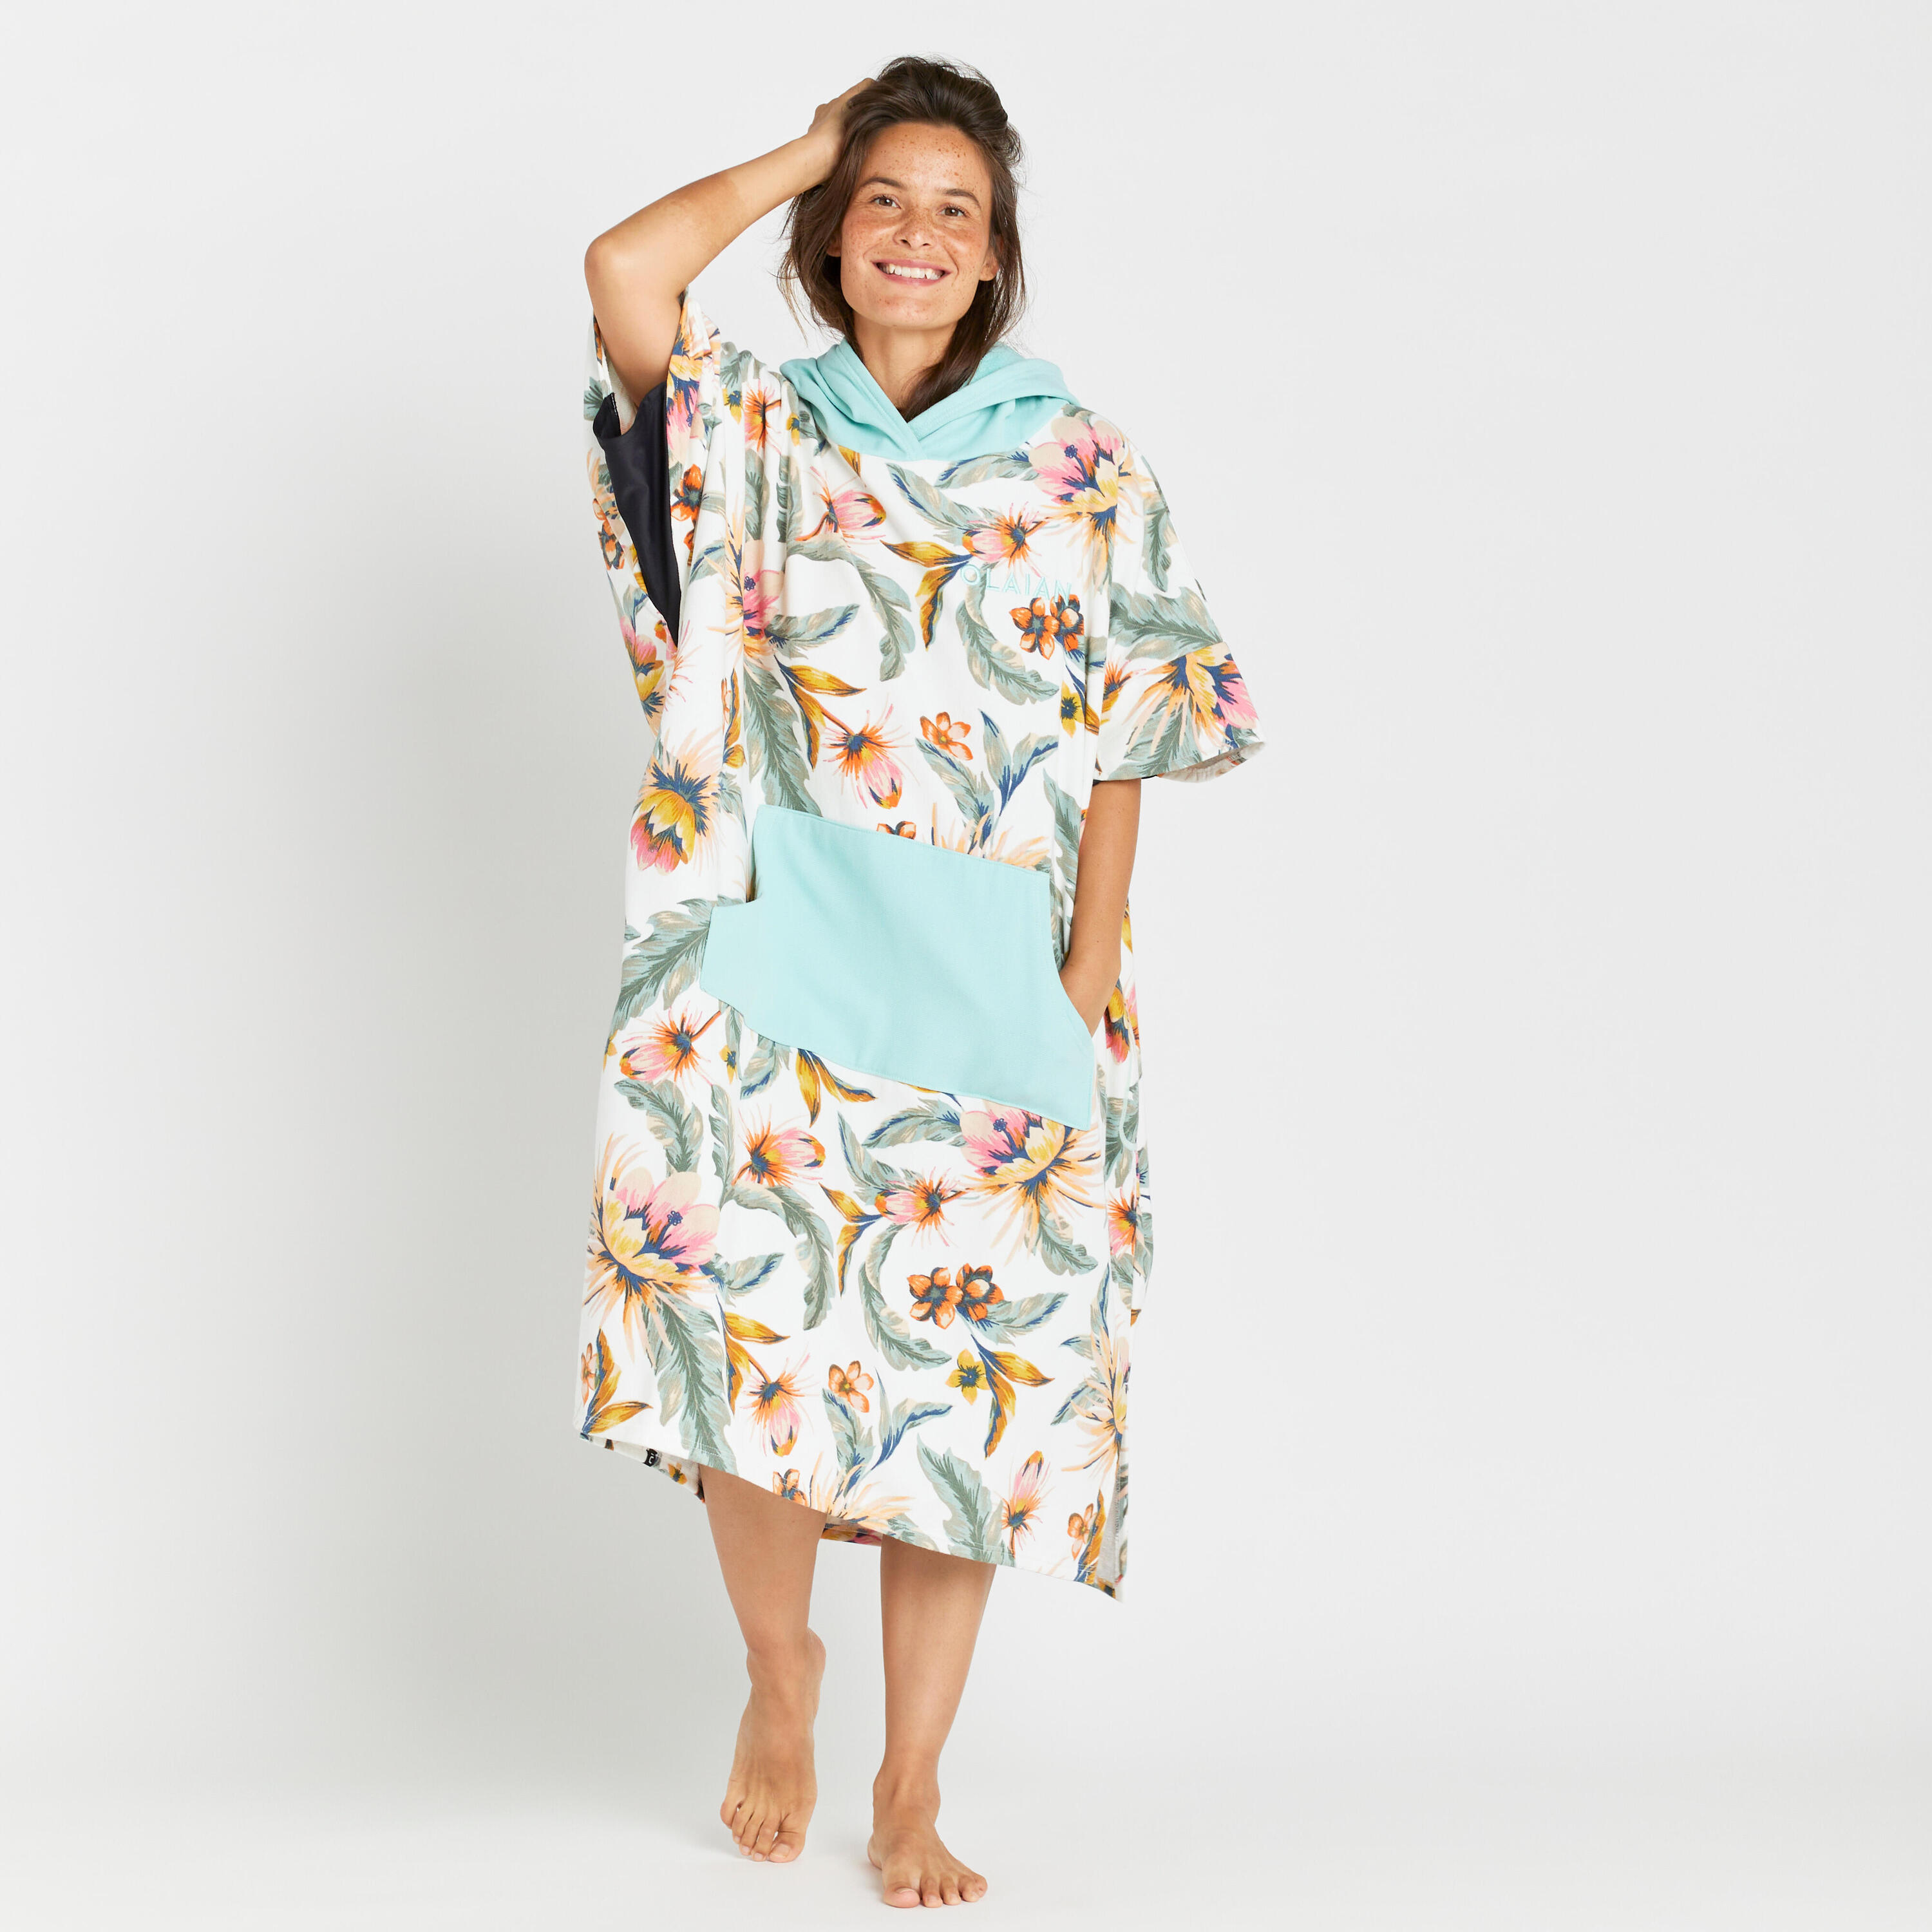 OLAIAN Adult Surf Poncho - 500 Belly white